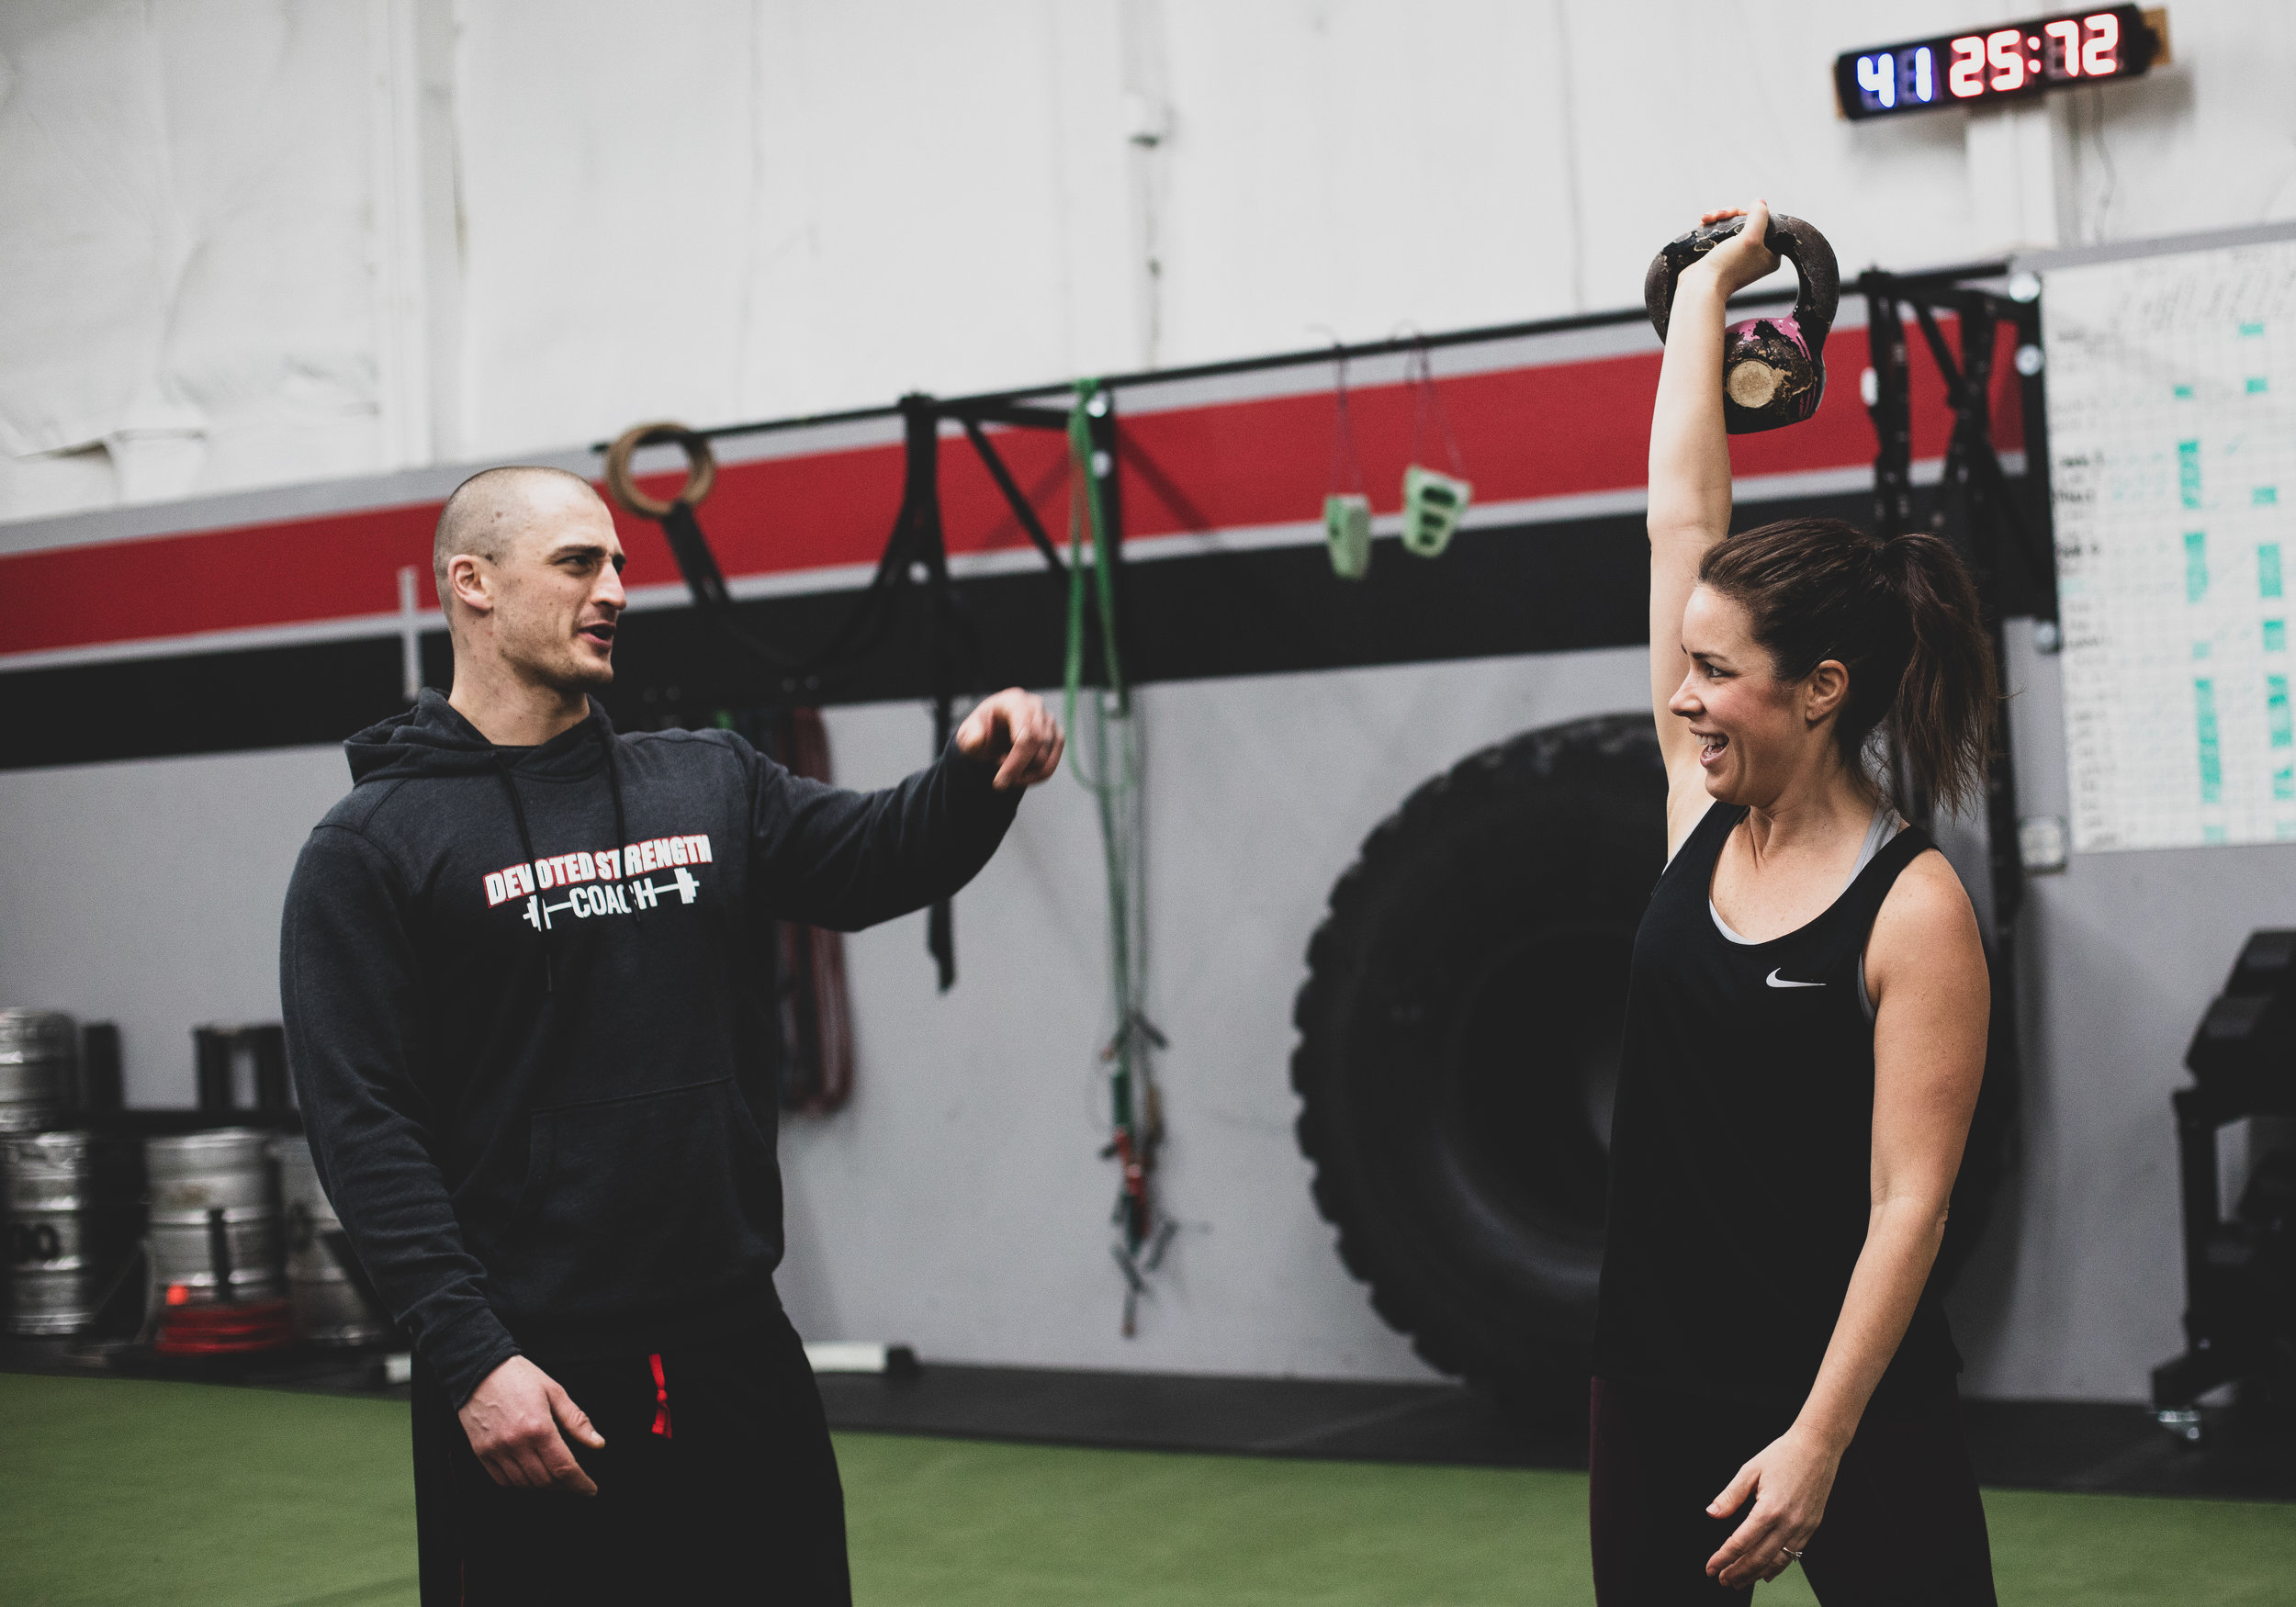   The 30-Day Kick-Start   Perfect for adults needing a fresh start or just looking to try something new. Experience the best that Devoted Fitness &amp; Strength has to offer commitment free.   Get Started  